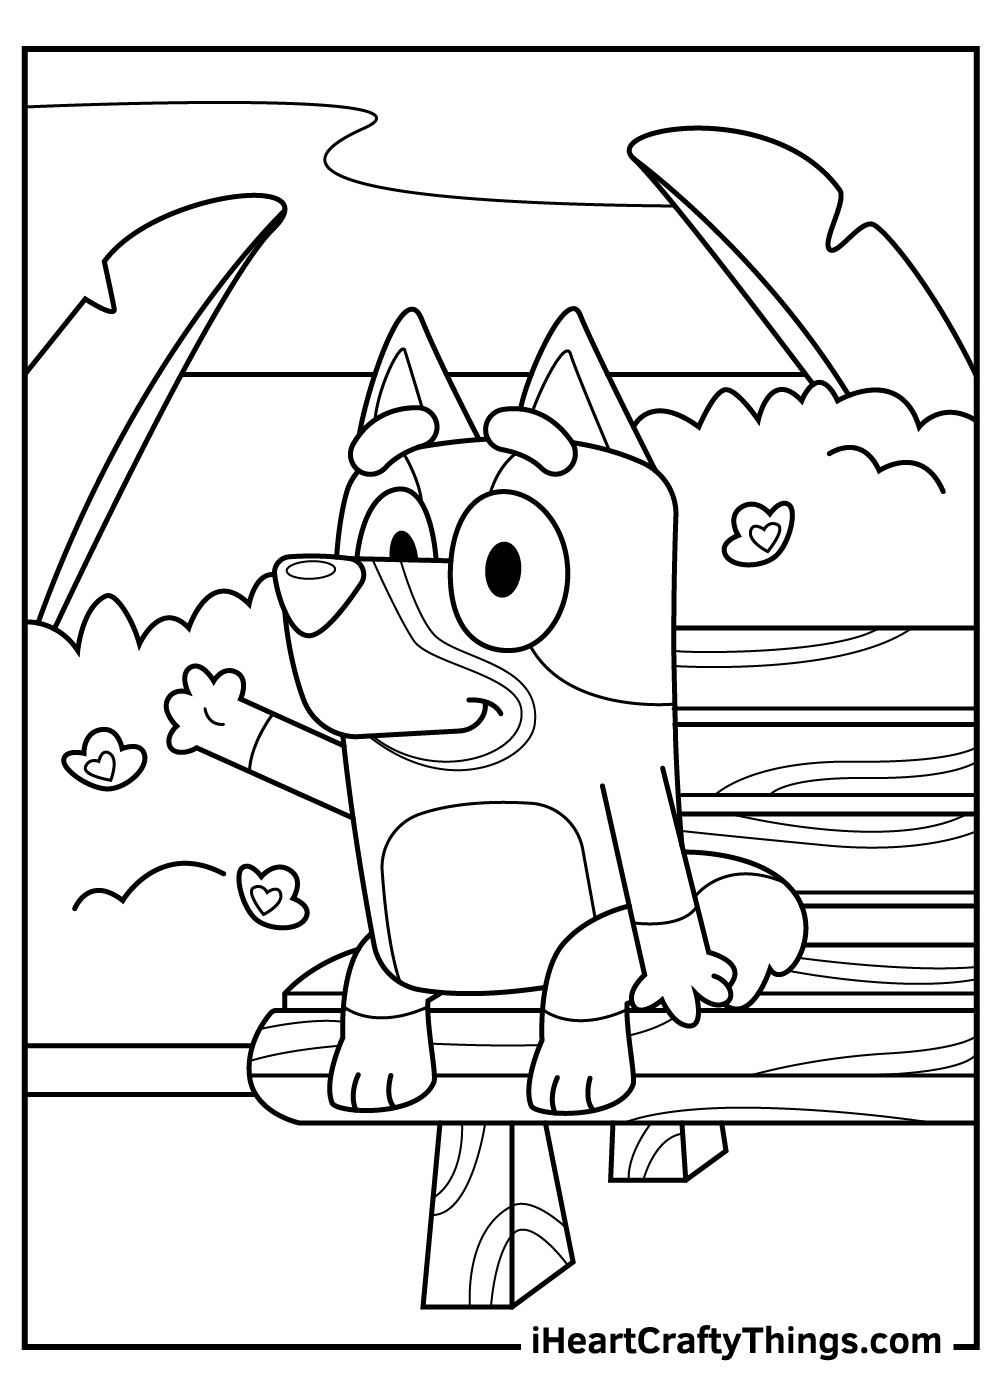 Bluey Coloring Pages Updated 2021 